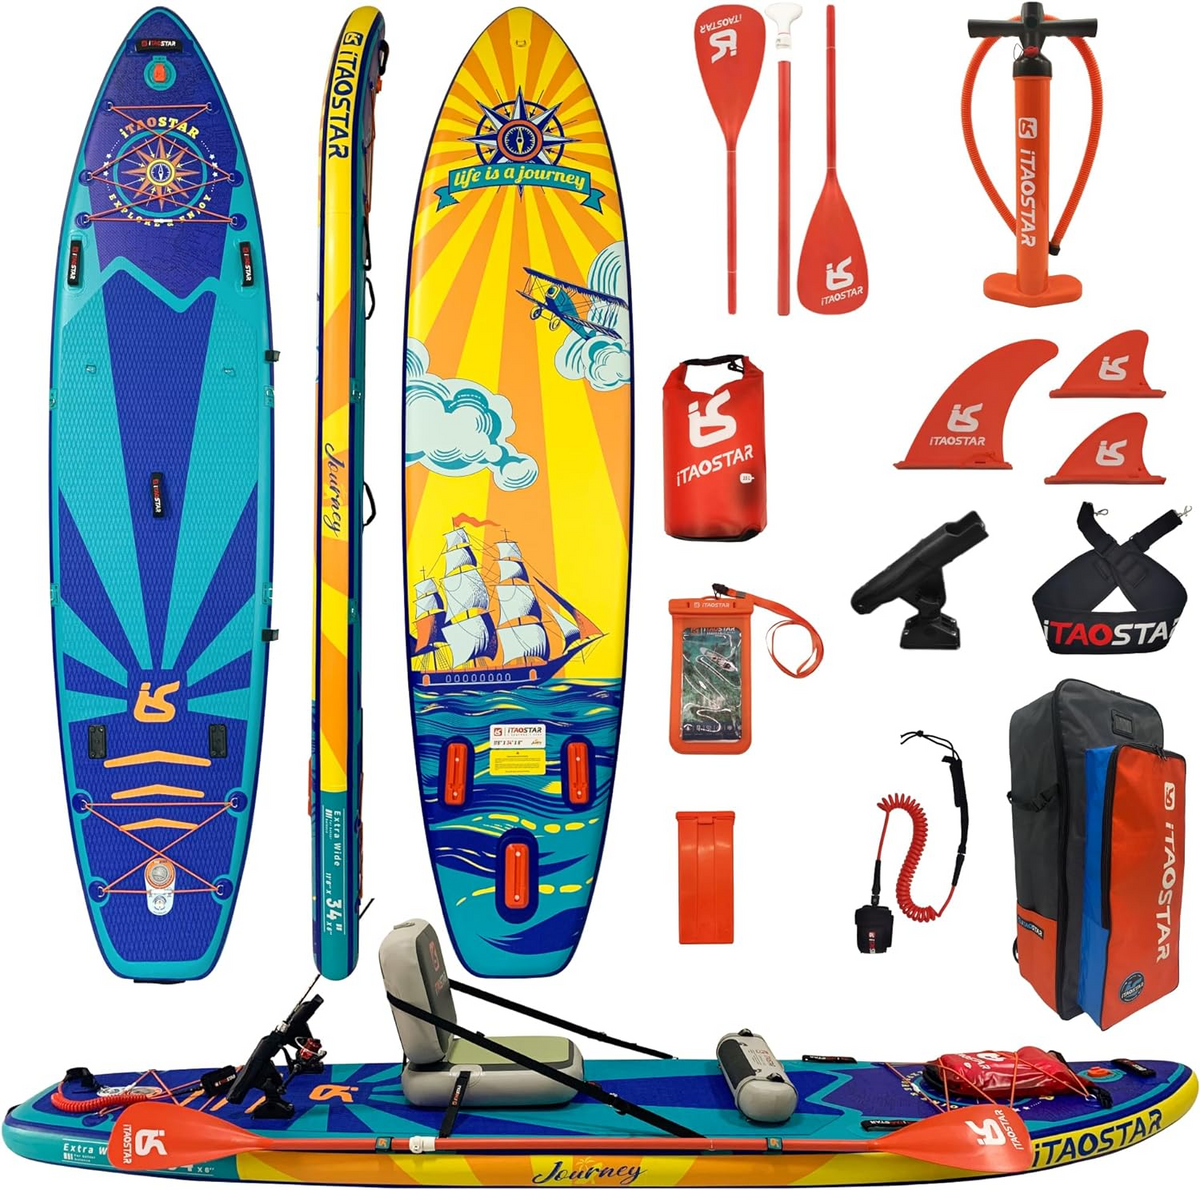 iTAOSTAR Journey Inflatable Stand Up Paddle Board with Seat!